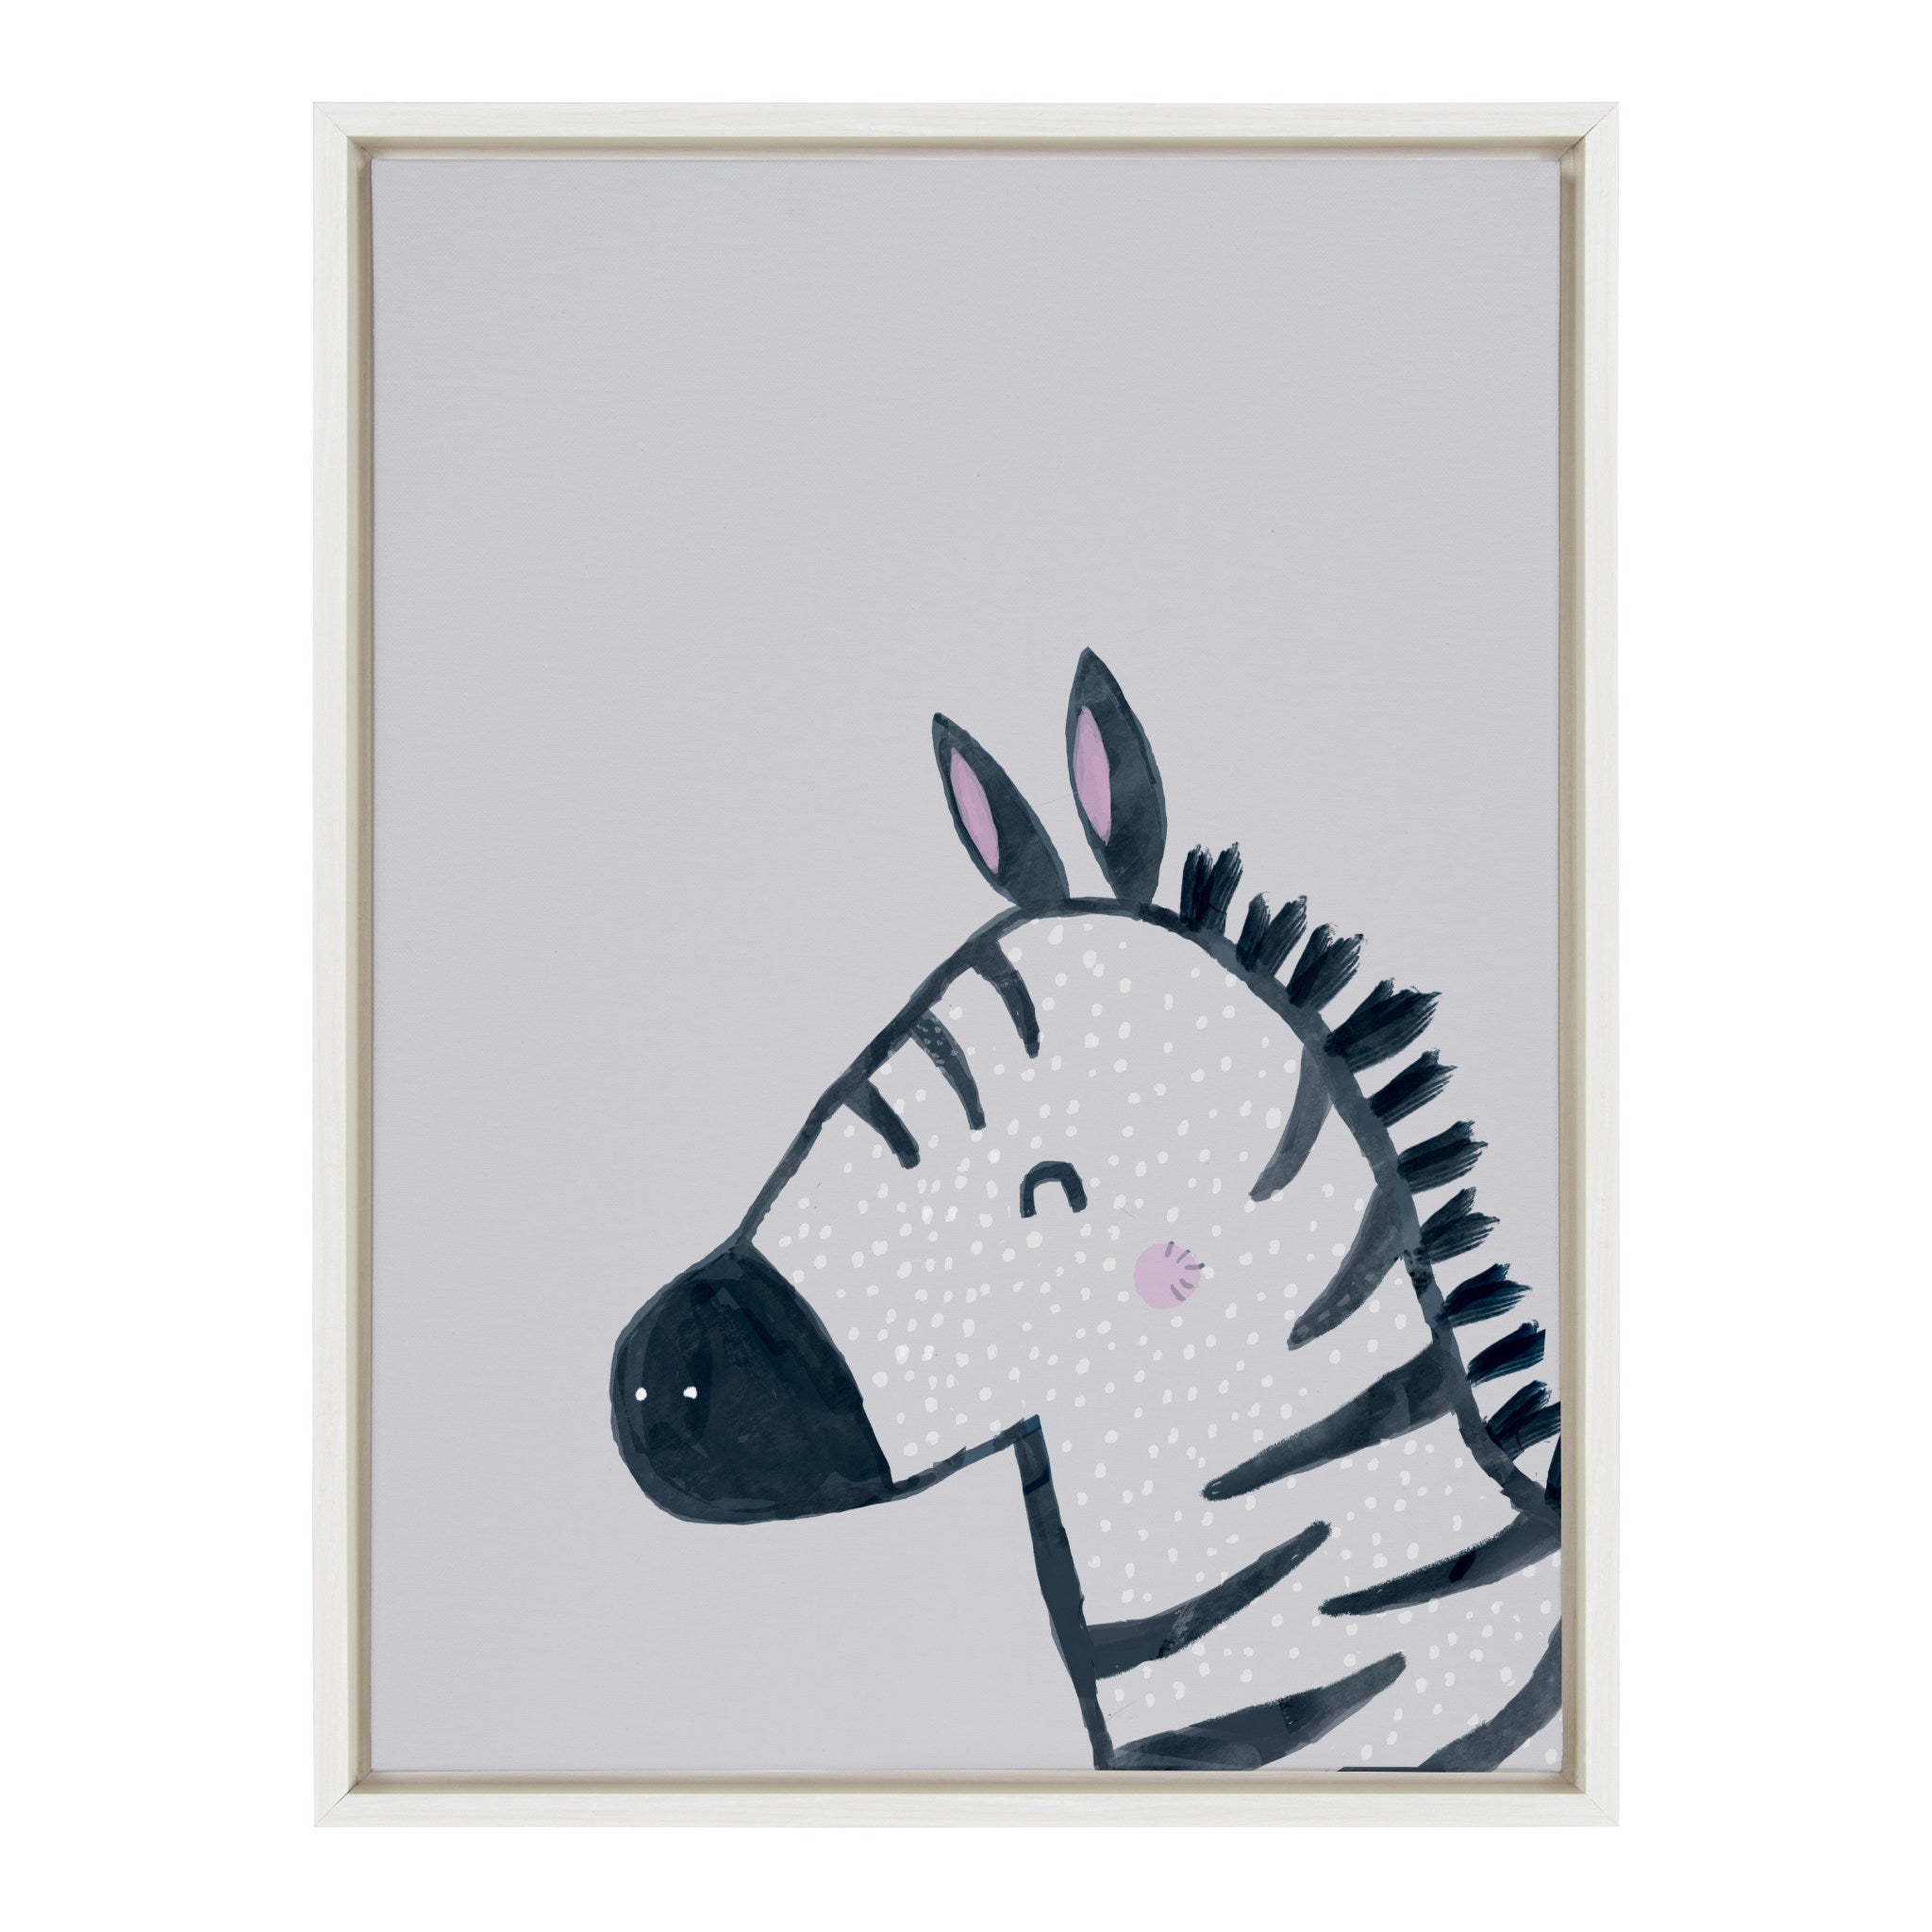 Sylvie Inky Zebra Framed Canvas by Lauradidthis